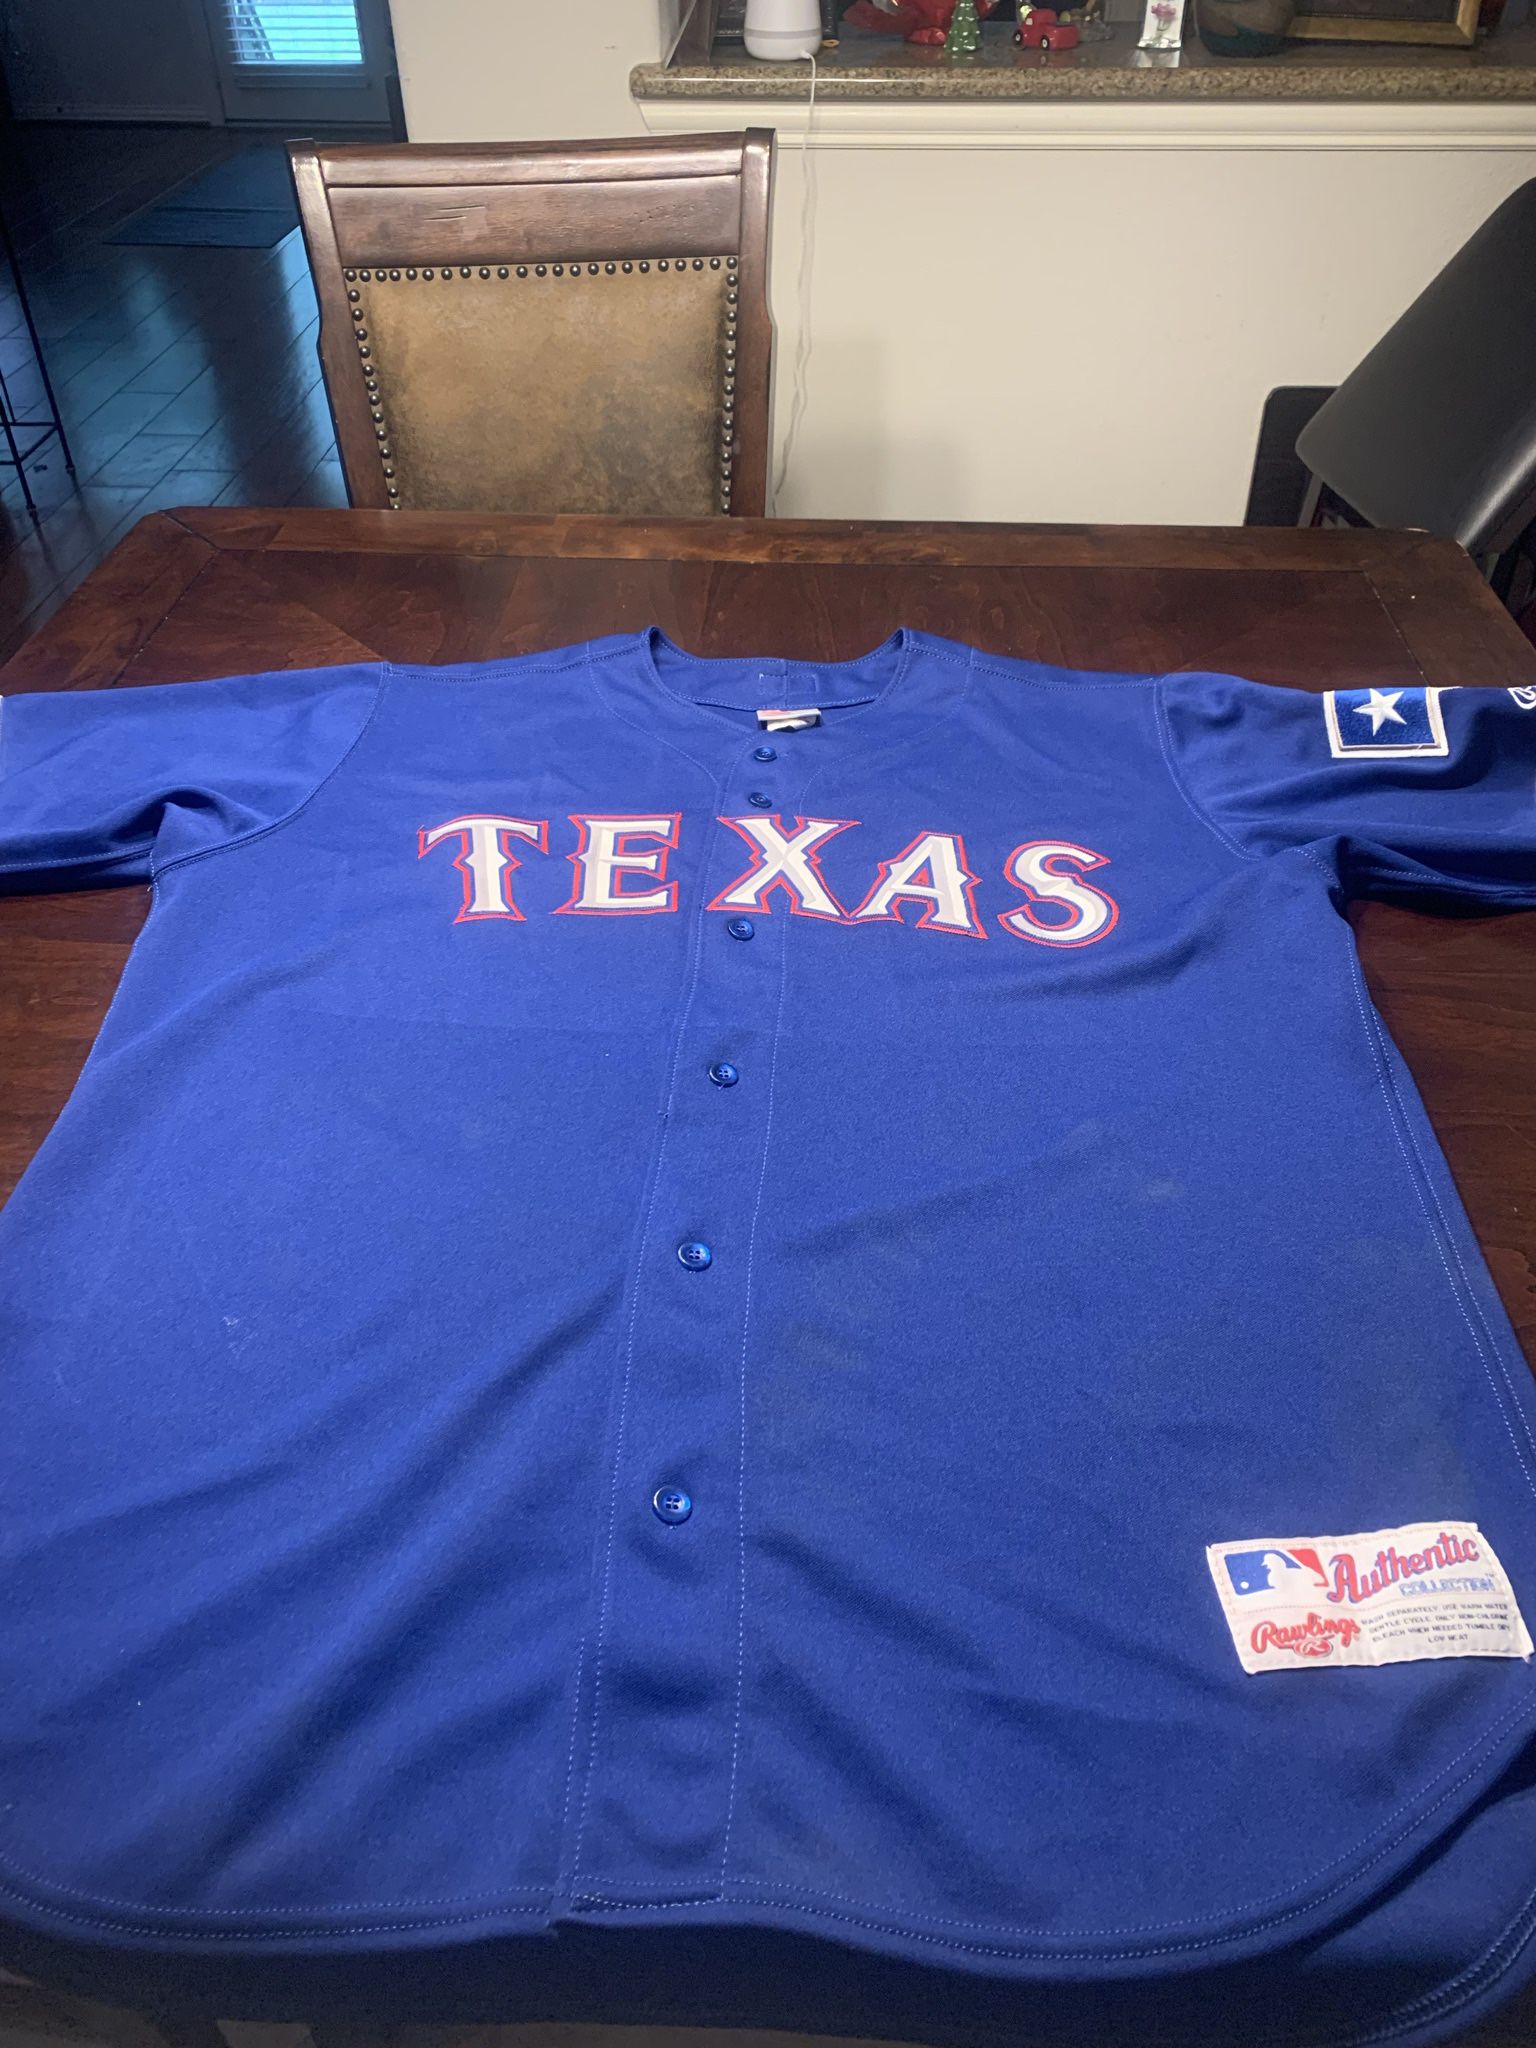 Authentic Texas Rangers Jersey for Sale in Humble, TX - OfferUp